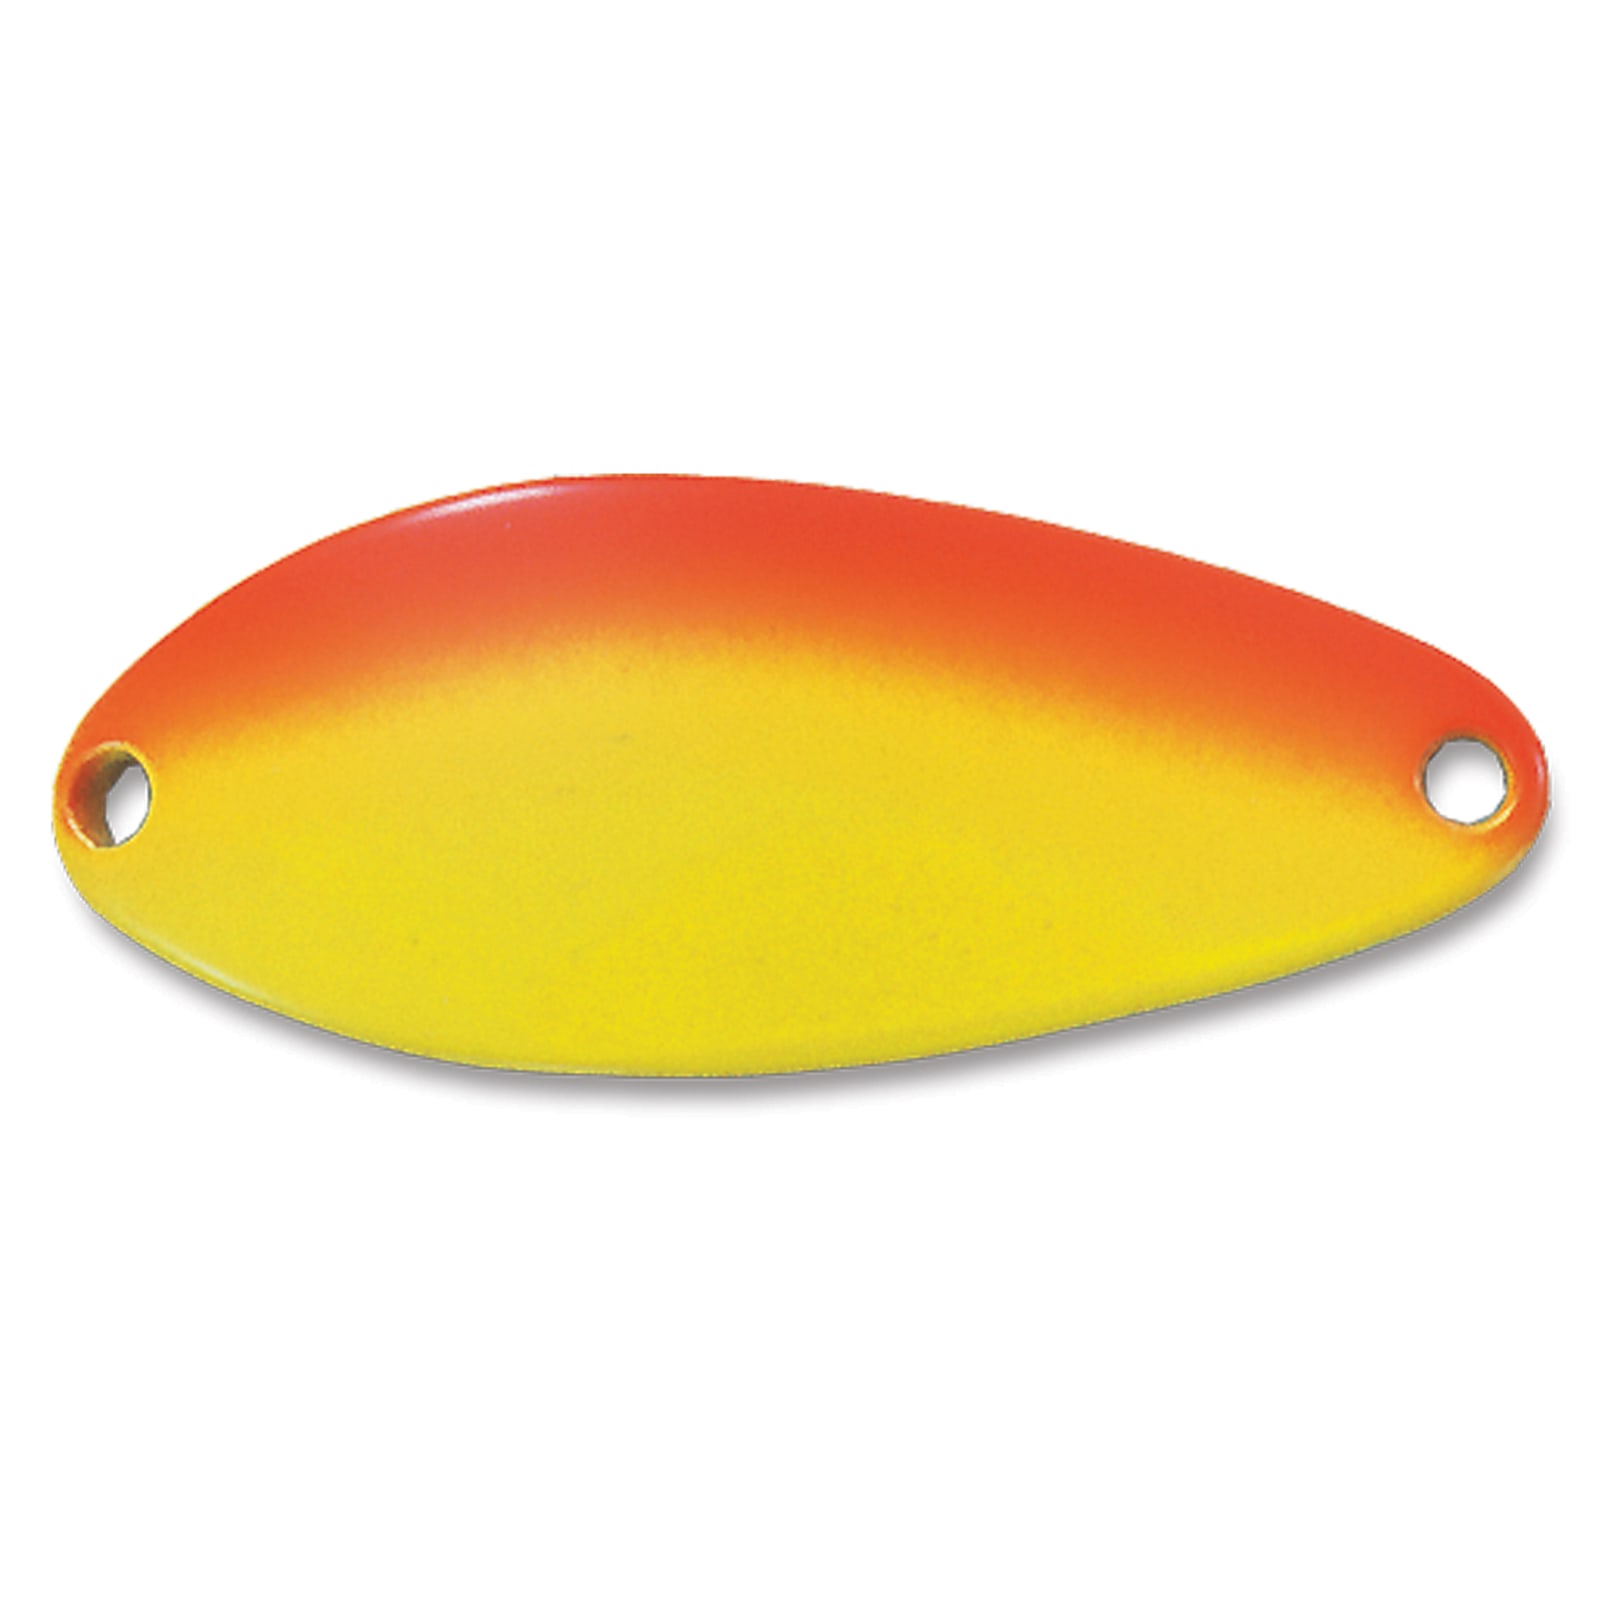 Little Cleo Spoon - Tequila Sunrise by Acme Tackle Company at Fleet Farm